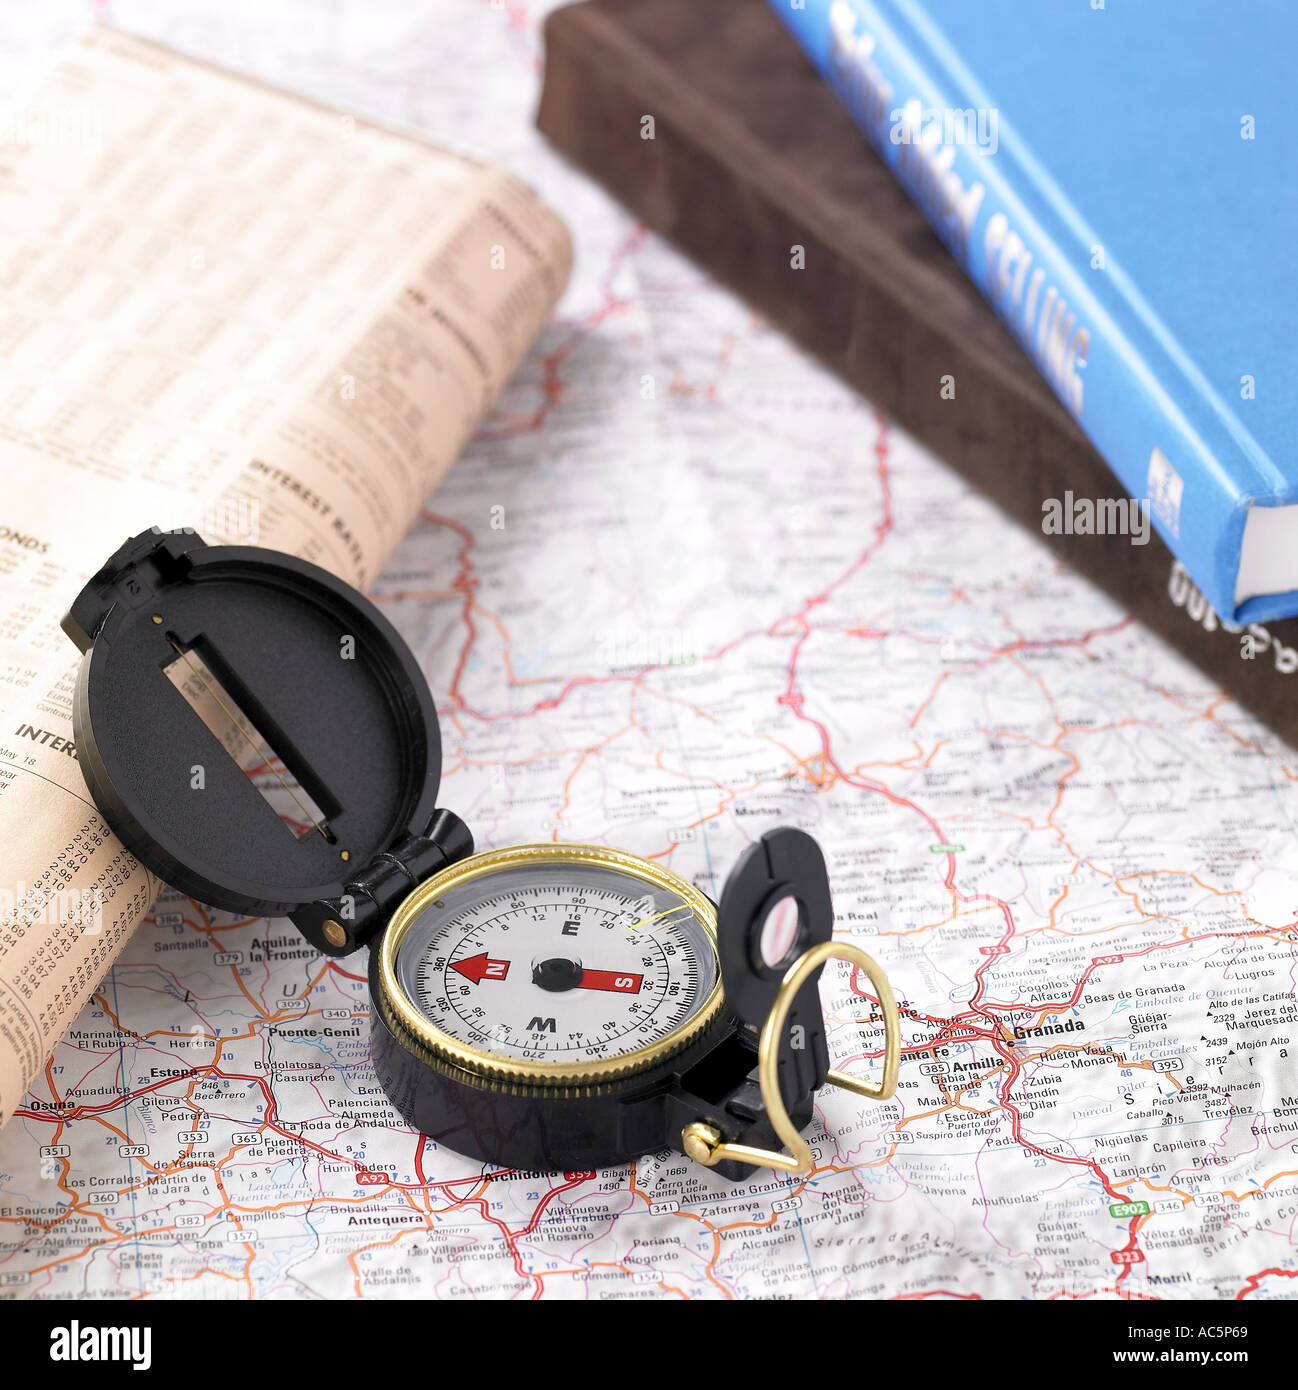 A compass on the map Stock Photo